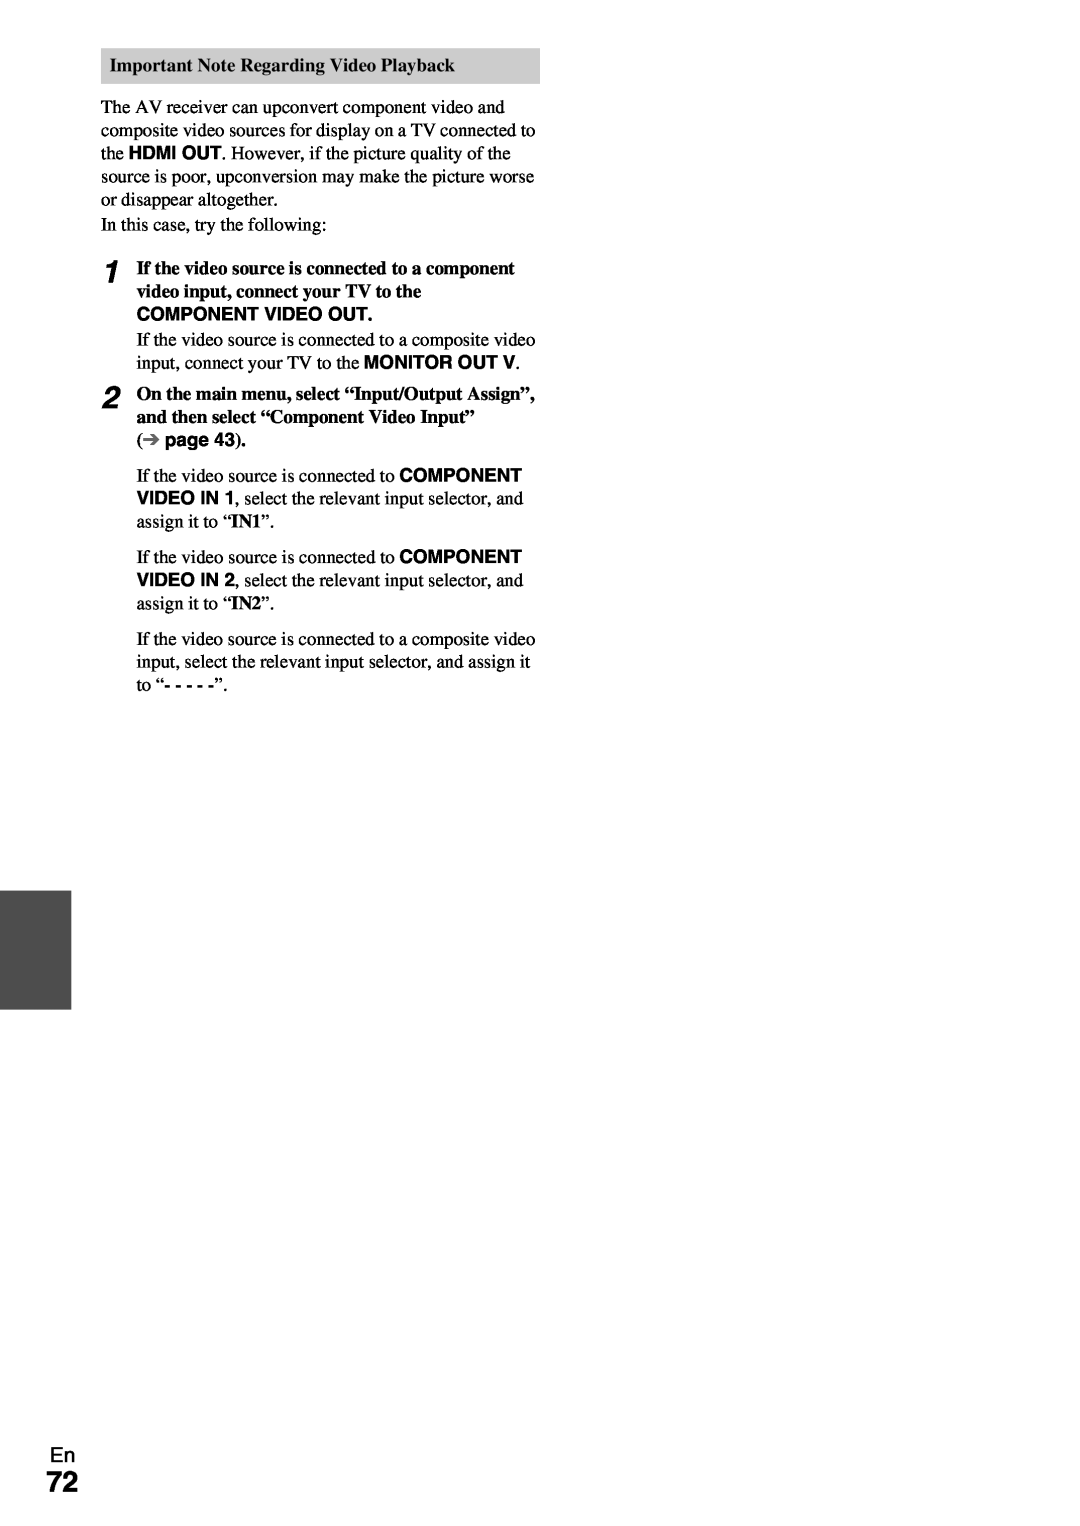 Onkyo HT-R990 instruction manual Important Note Regarding Video Playback, Component Video Out, page 